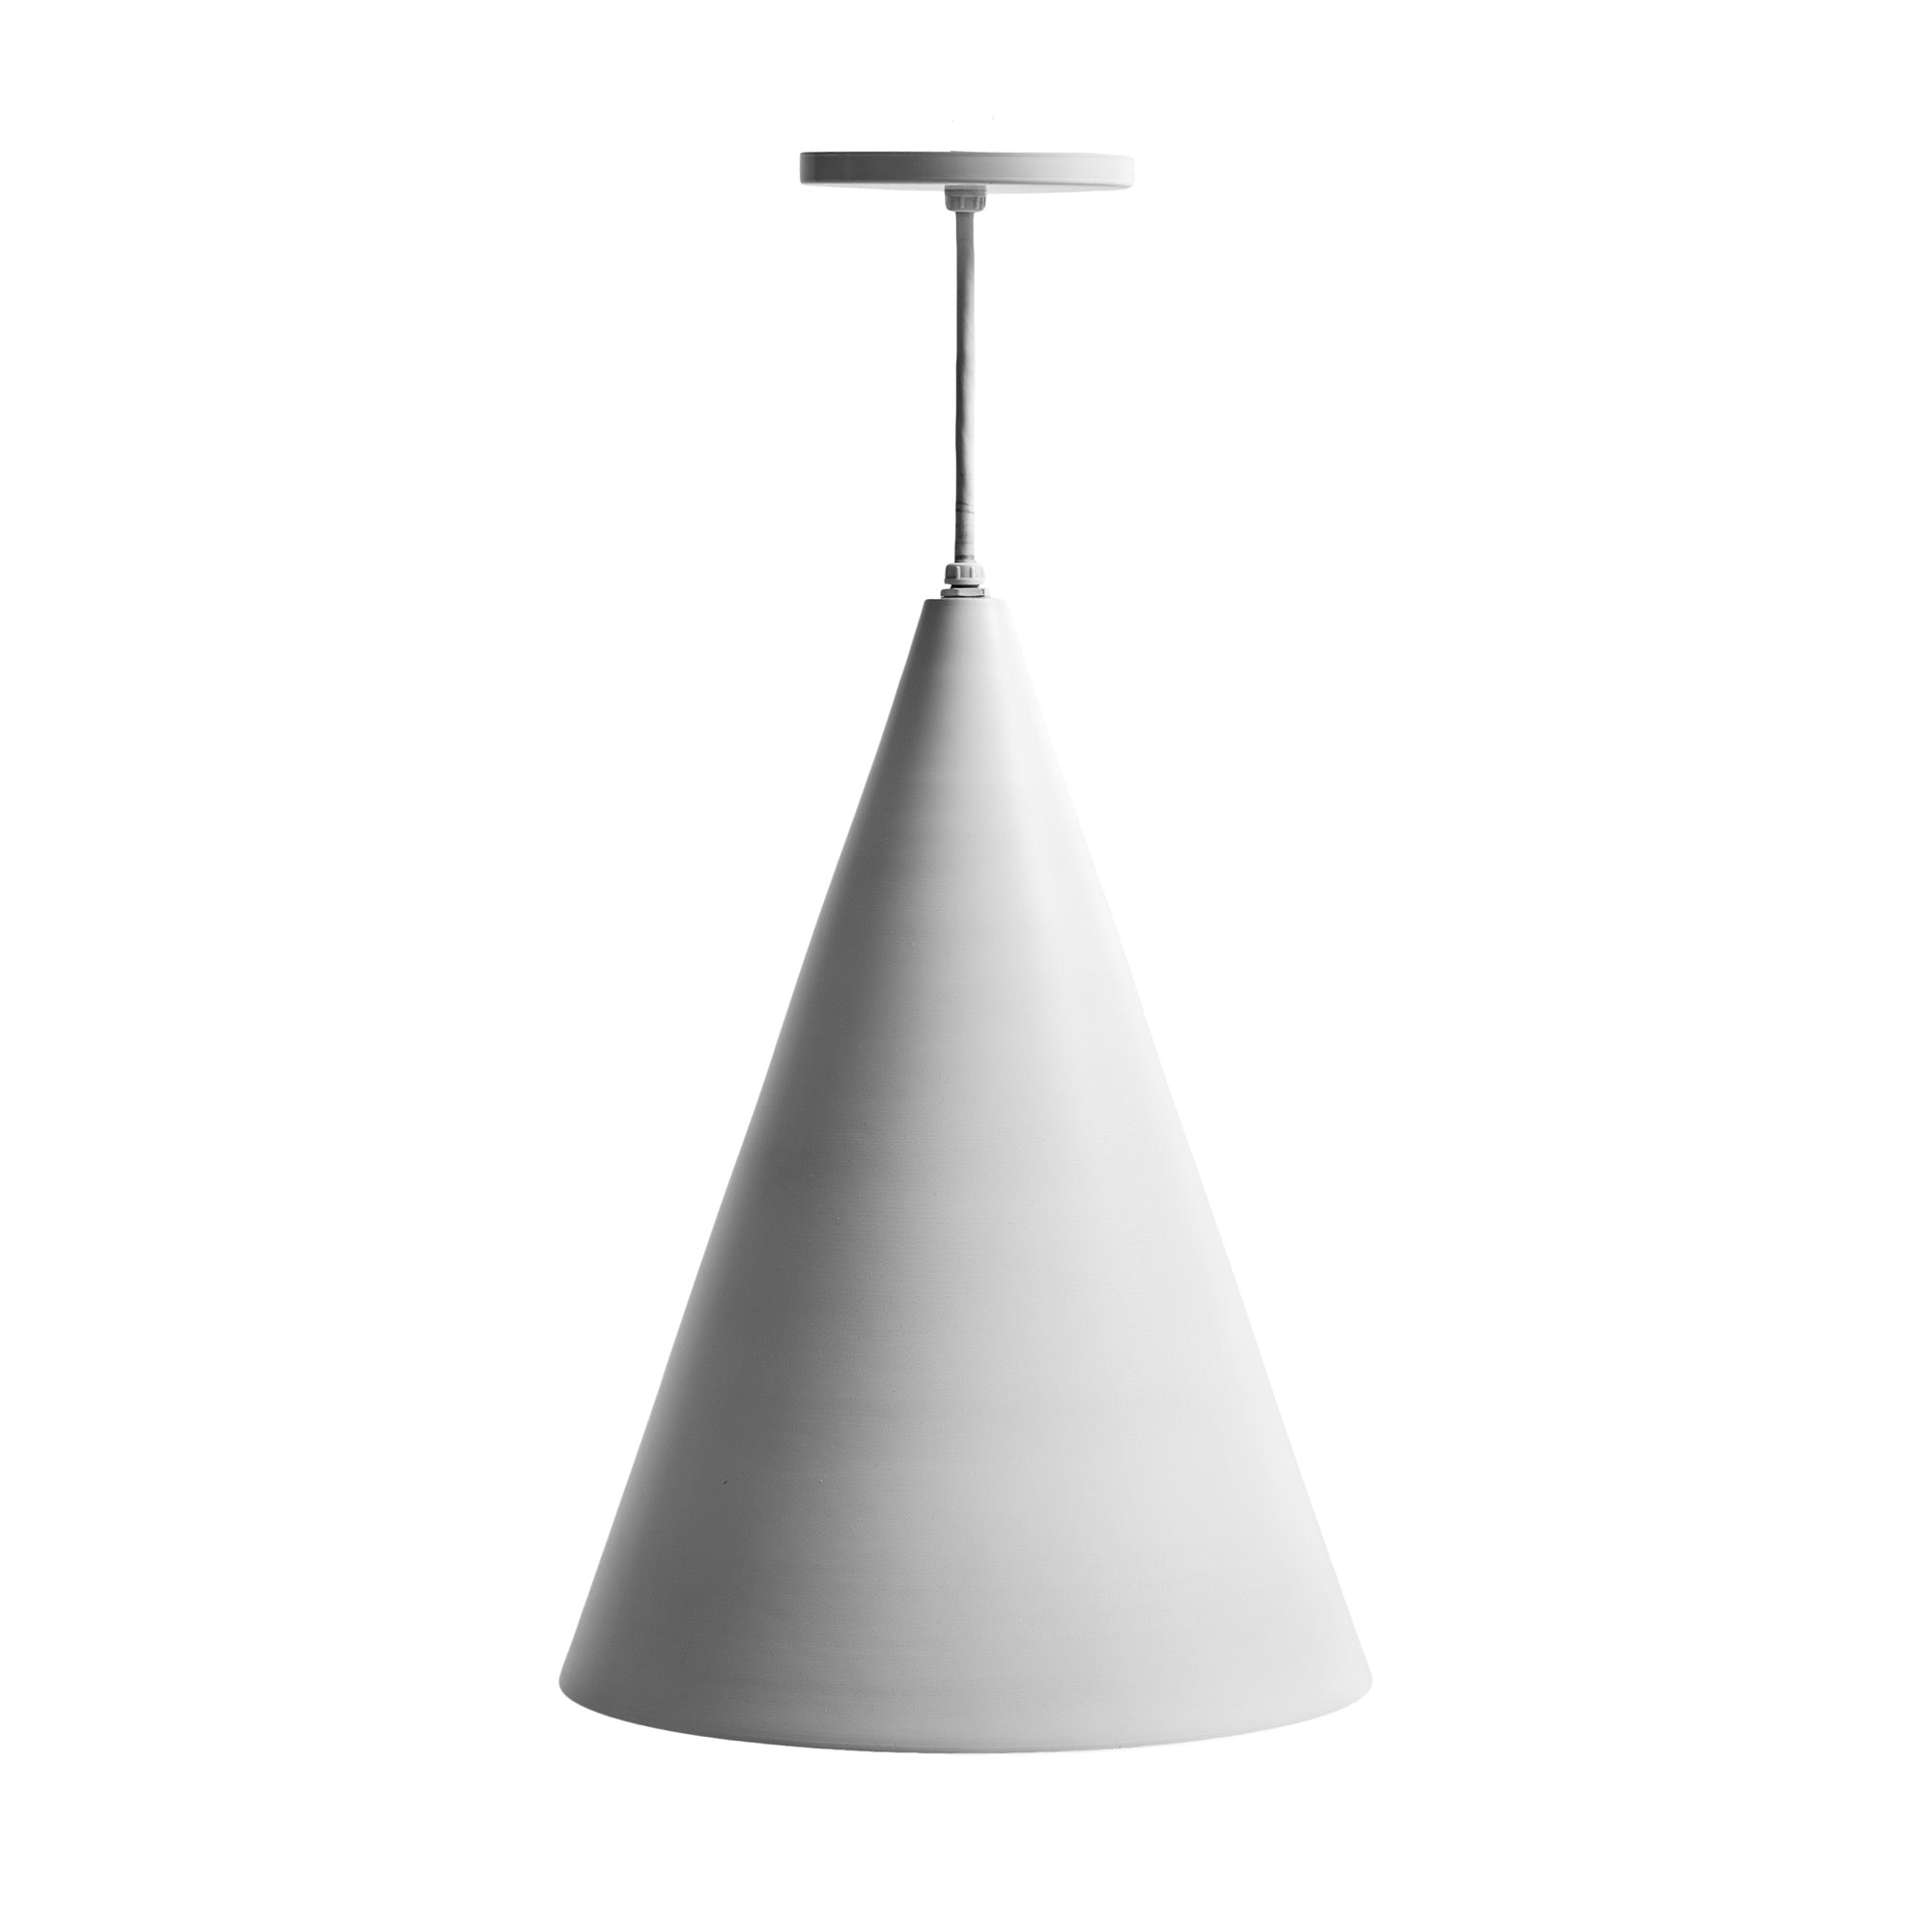 Conical Shaped Pendant Lamp by Arne Jacobsen